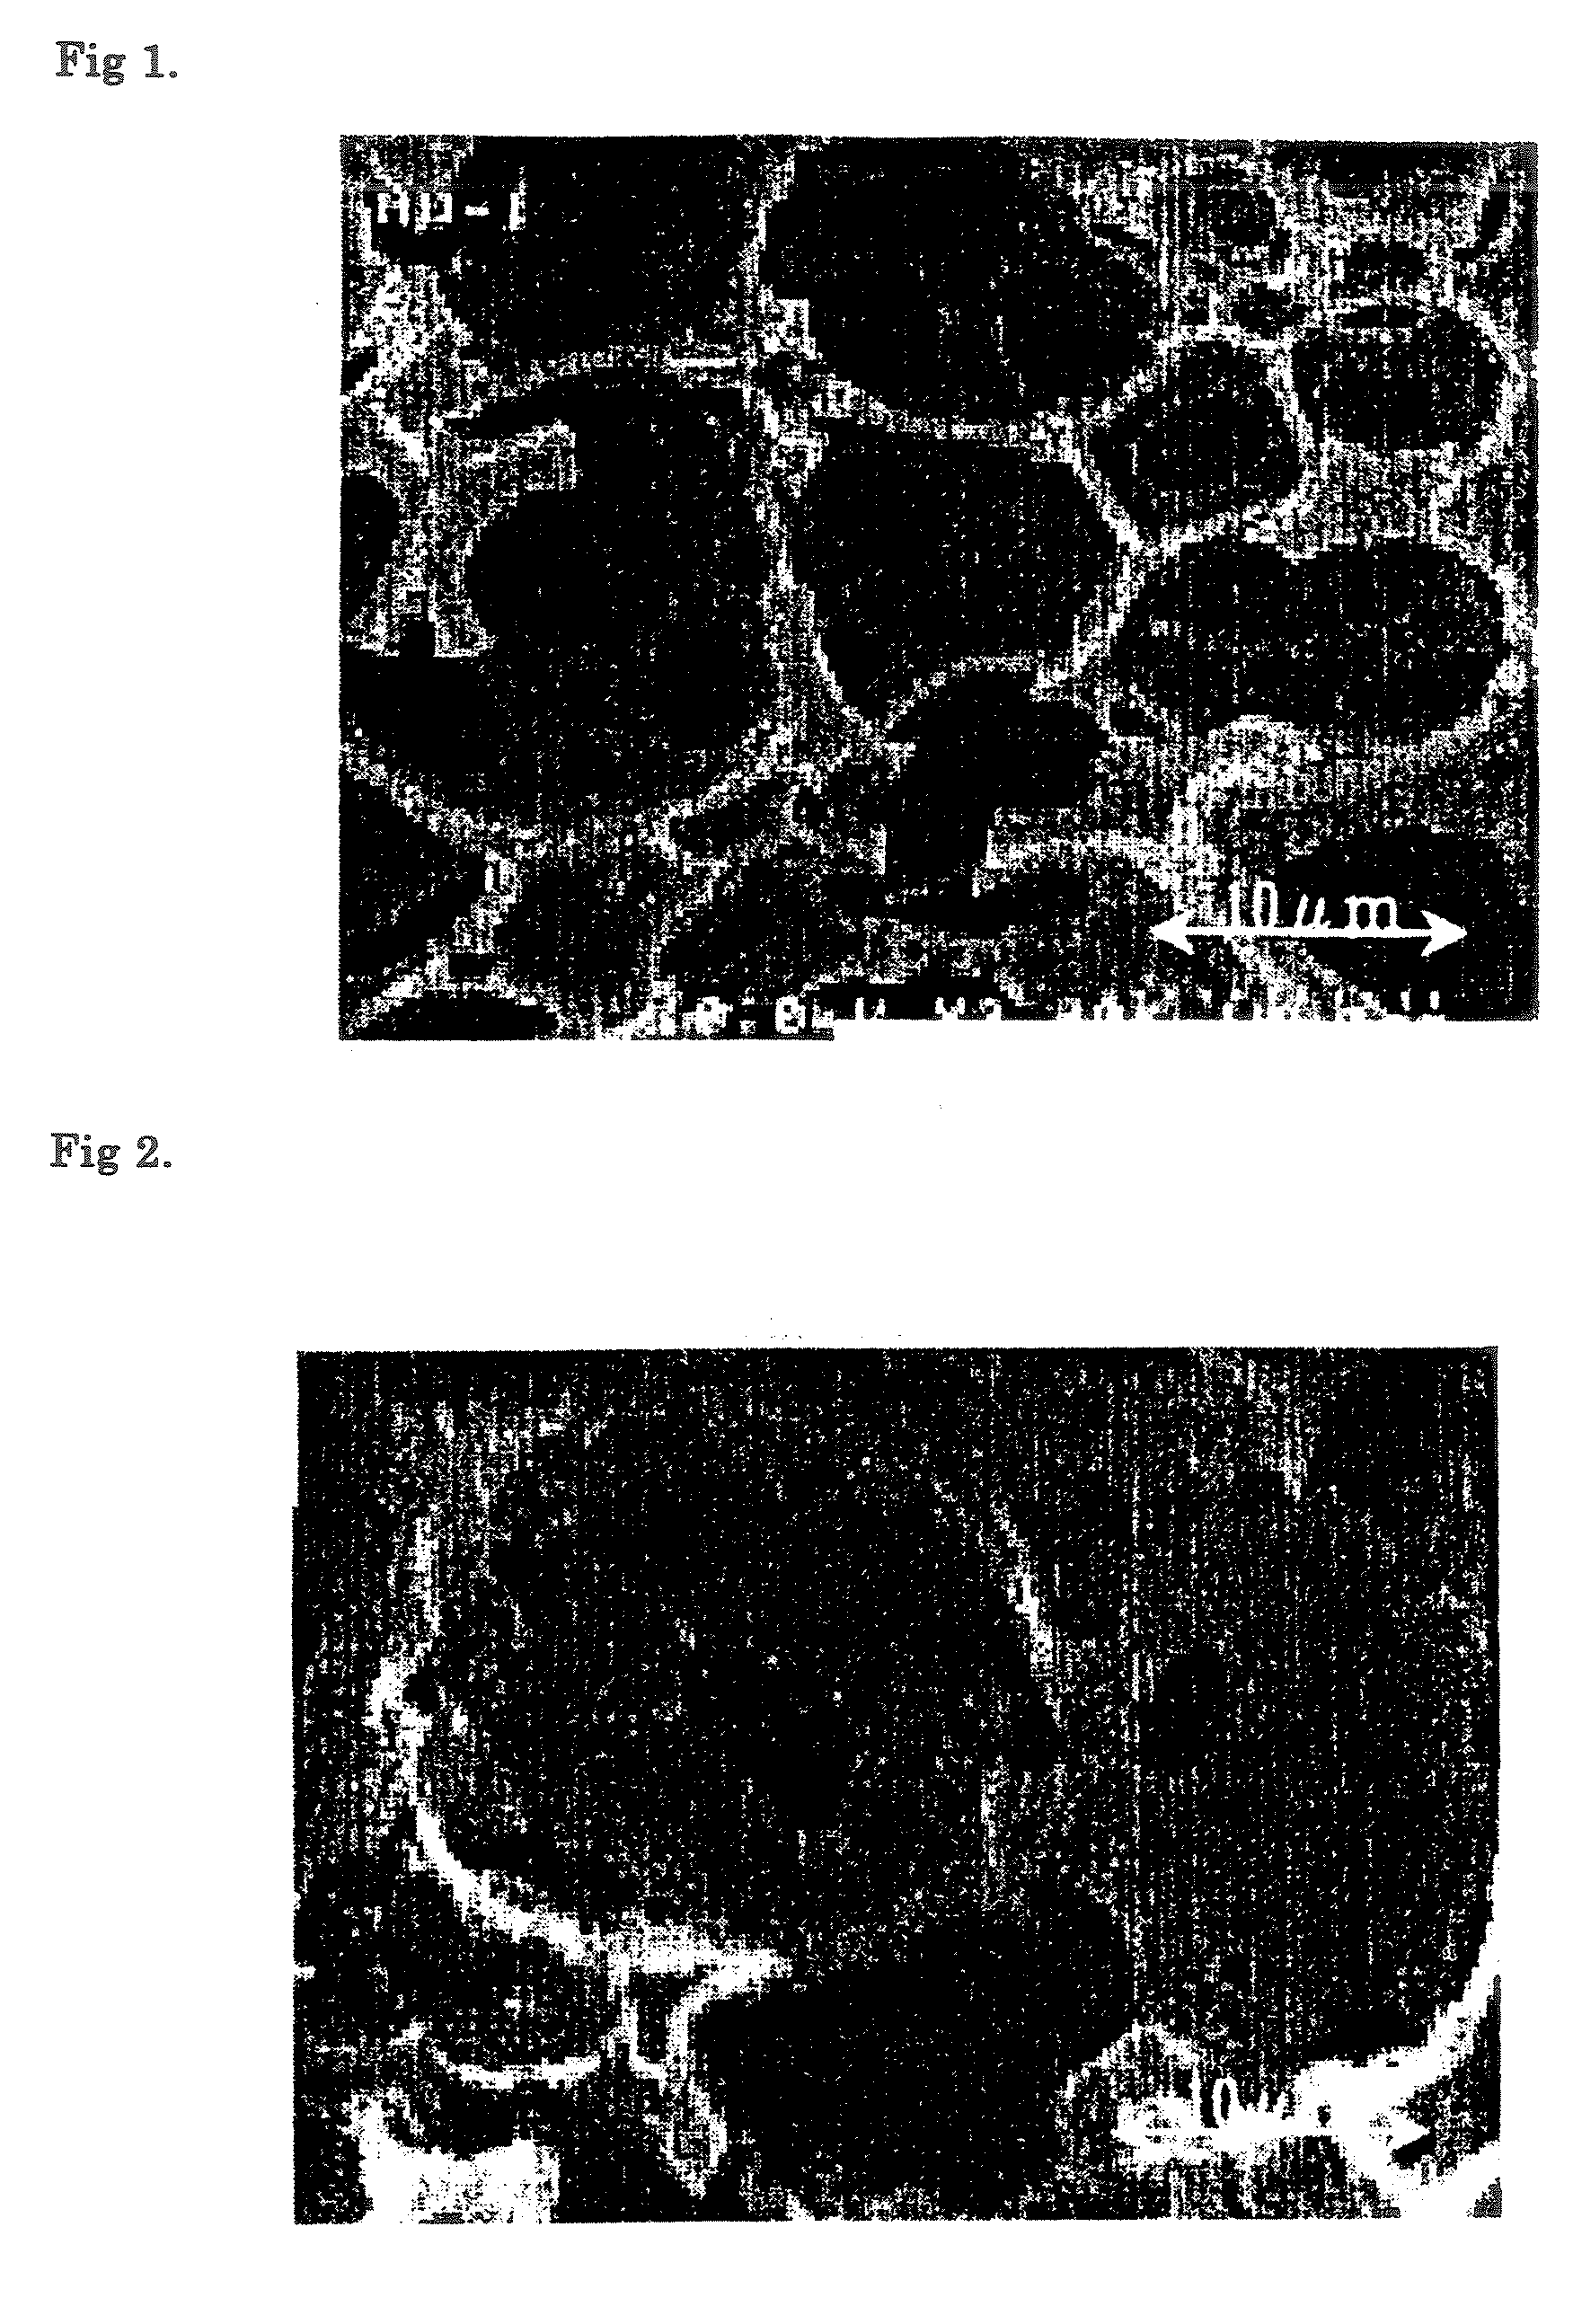 Non-particulate organic porous material having optical resolution capability and method for manufacturing same